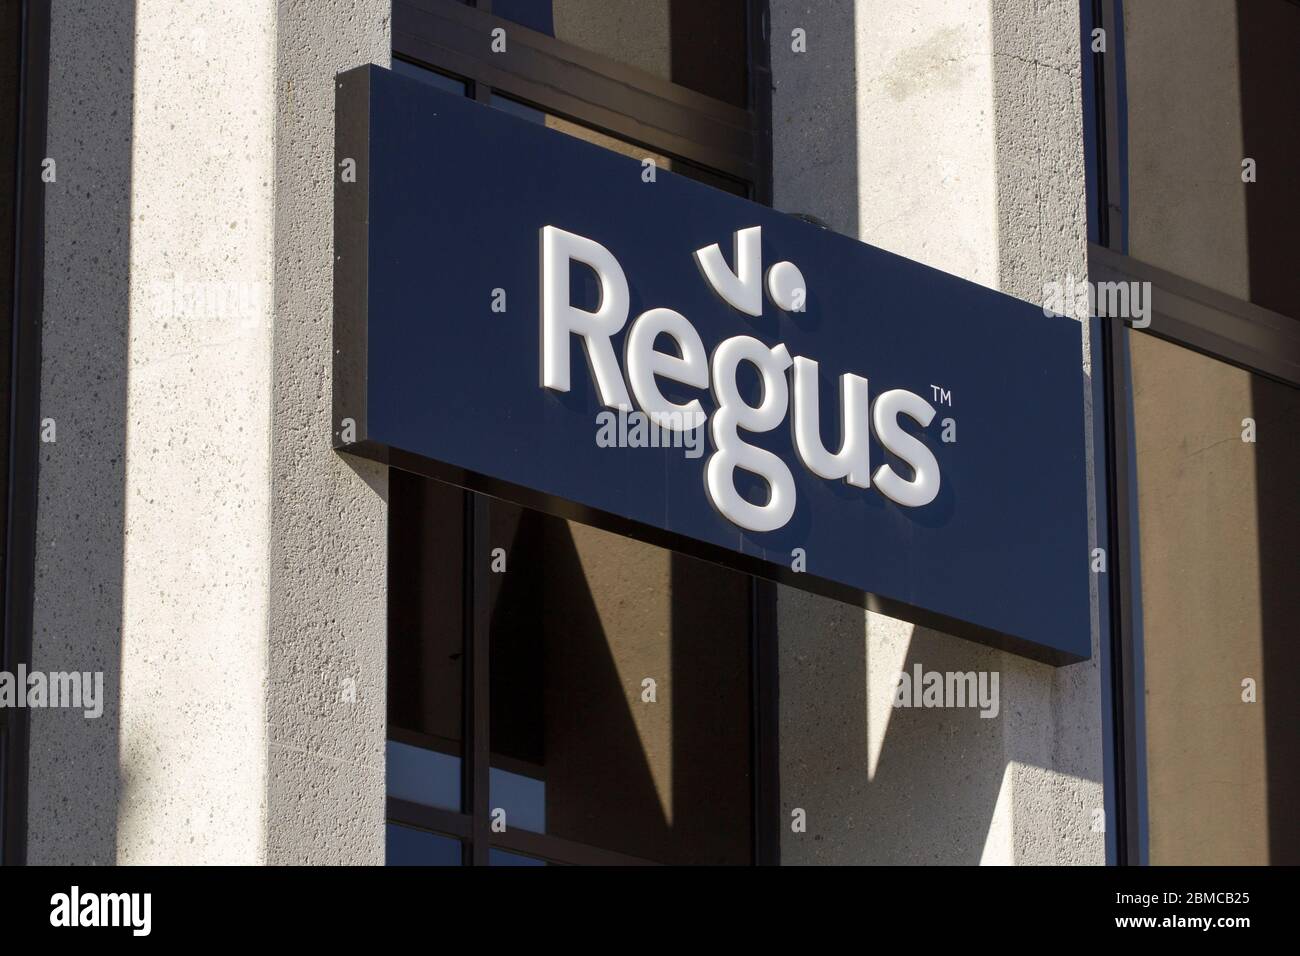 The Regus sign is seen at Regus San Jose location. Regus is a provider of serviced offices, coworking spaces, business lounges, and virtual offices. Stock Photo